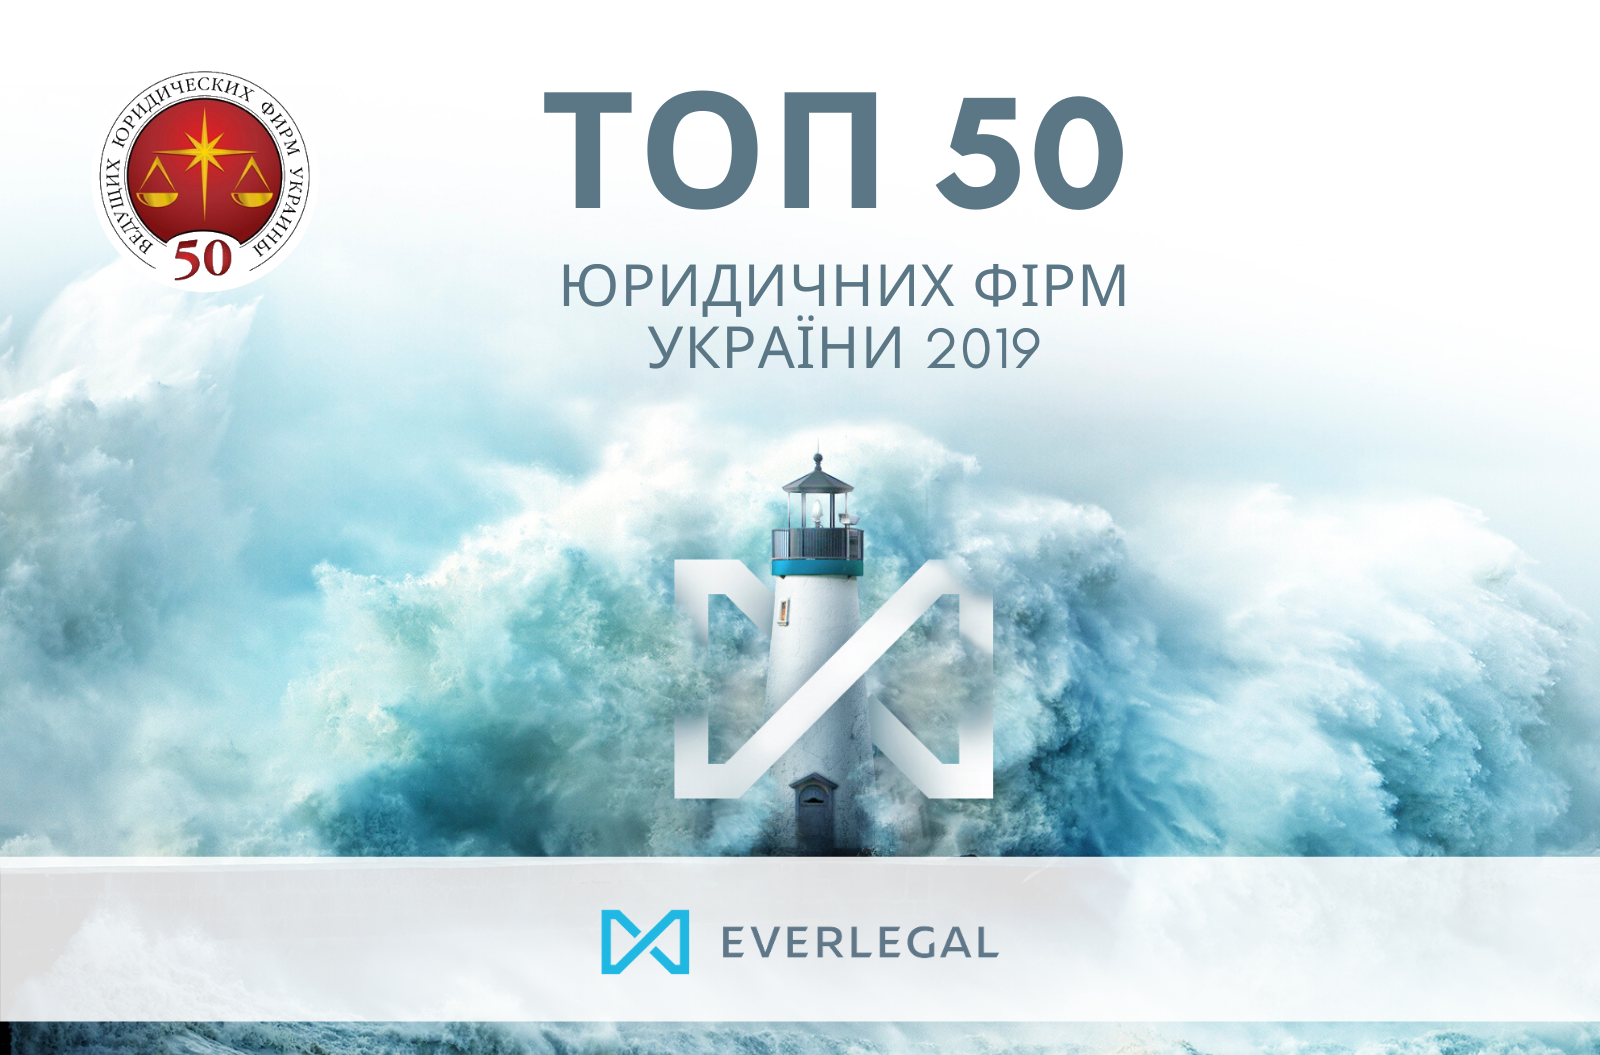 EVERLEGAL is a TOP 20 Ukrainian Law Firm 2019